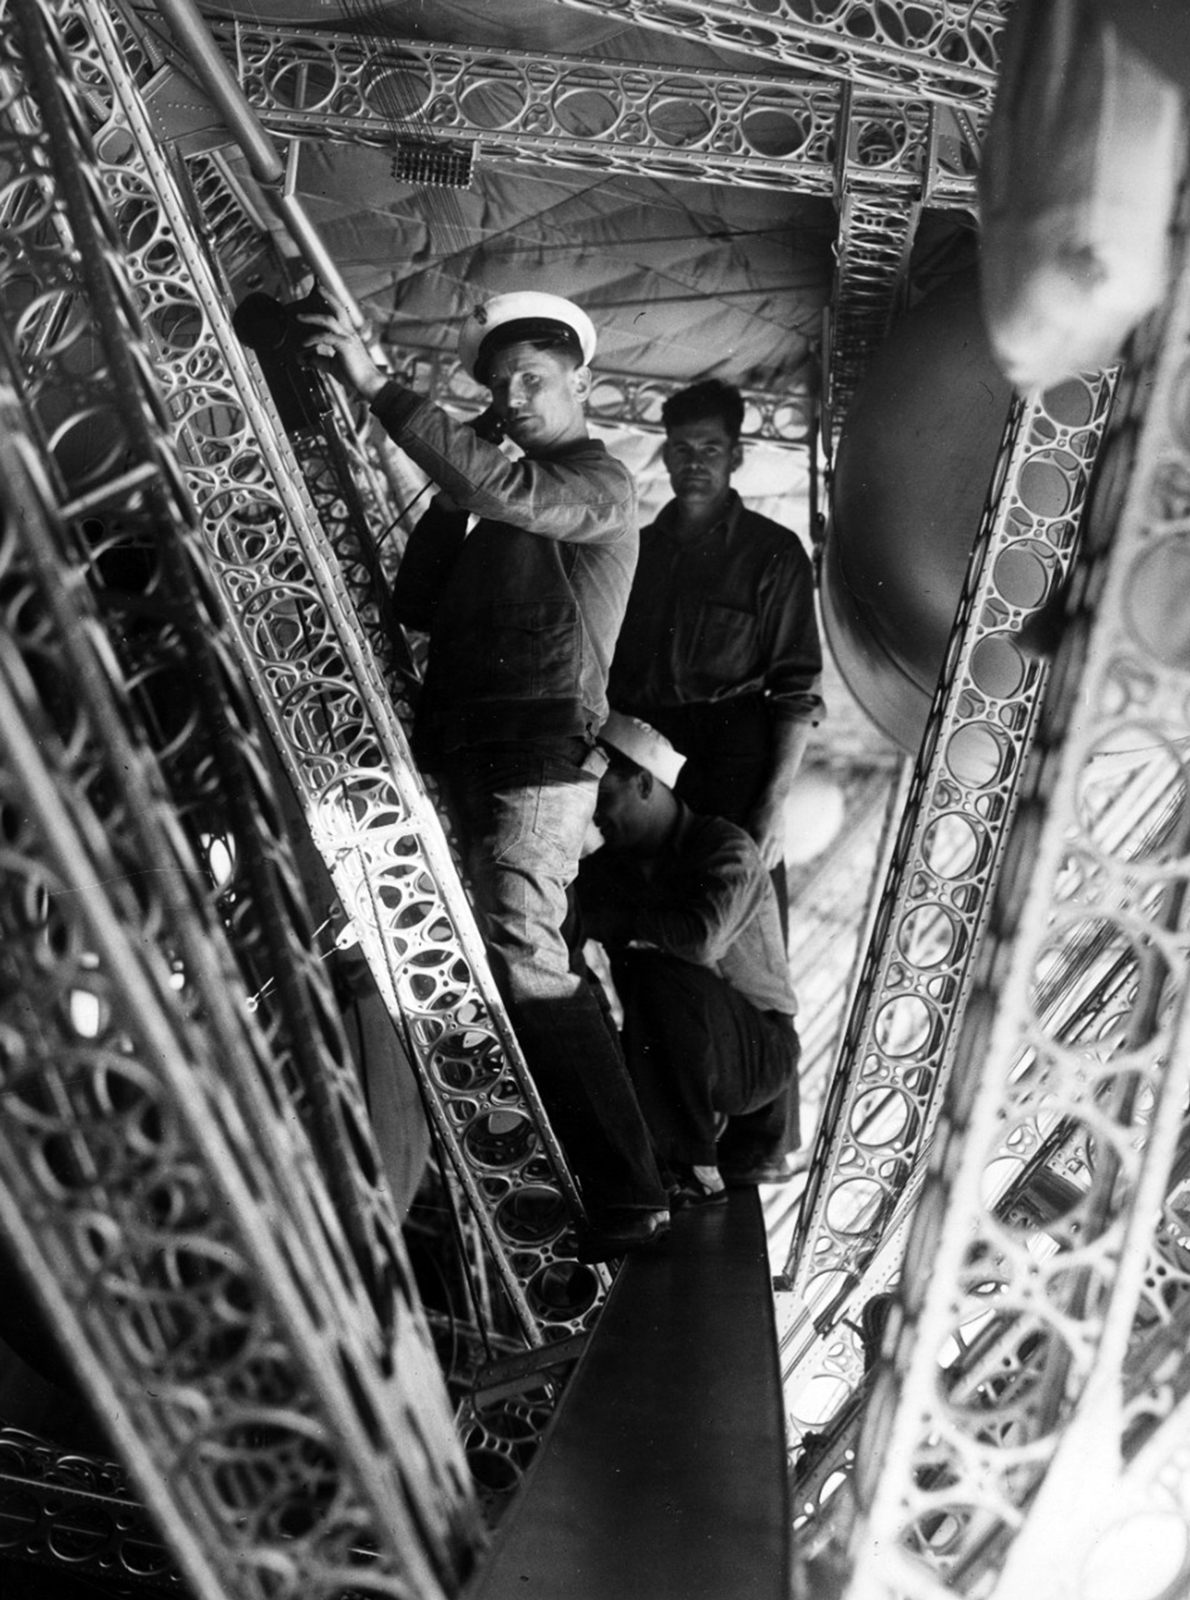 Three crew members of the USS Macon, stand on the narrow catwalk between the metal structural ribs of the huge rigid airship.